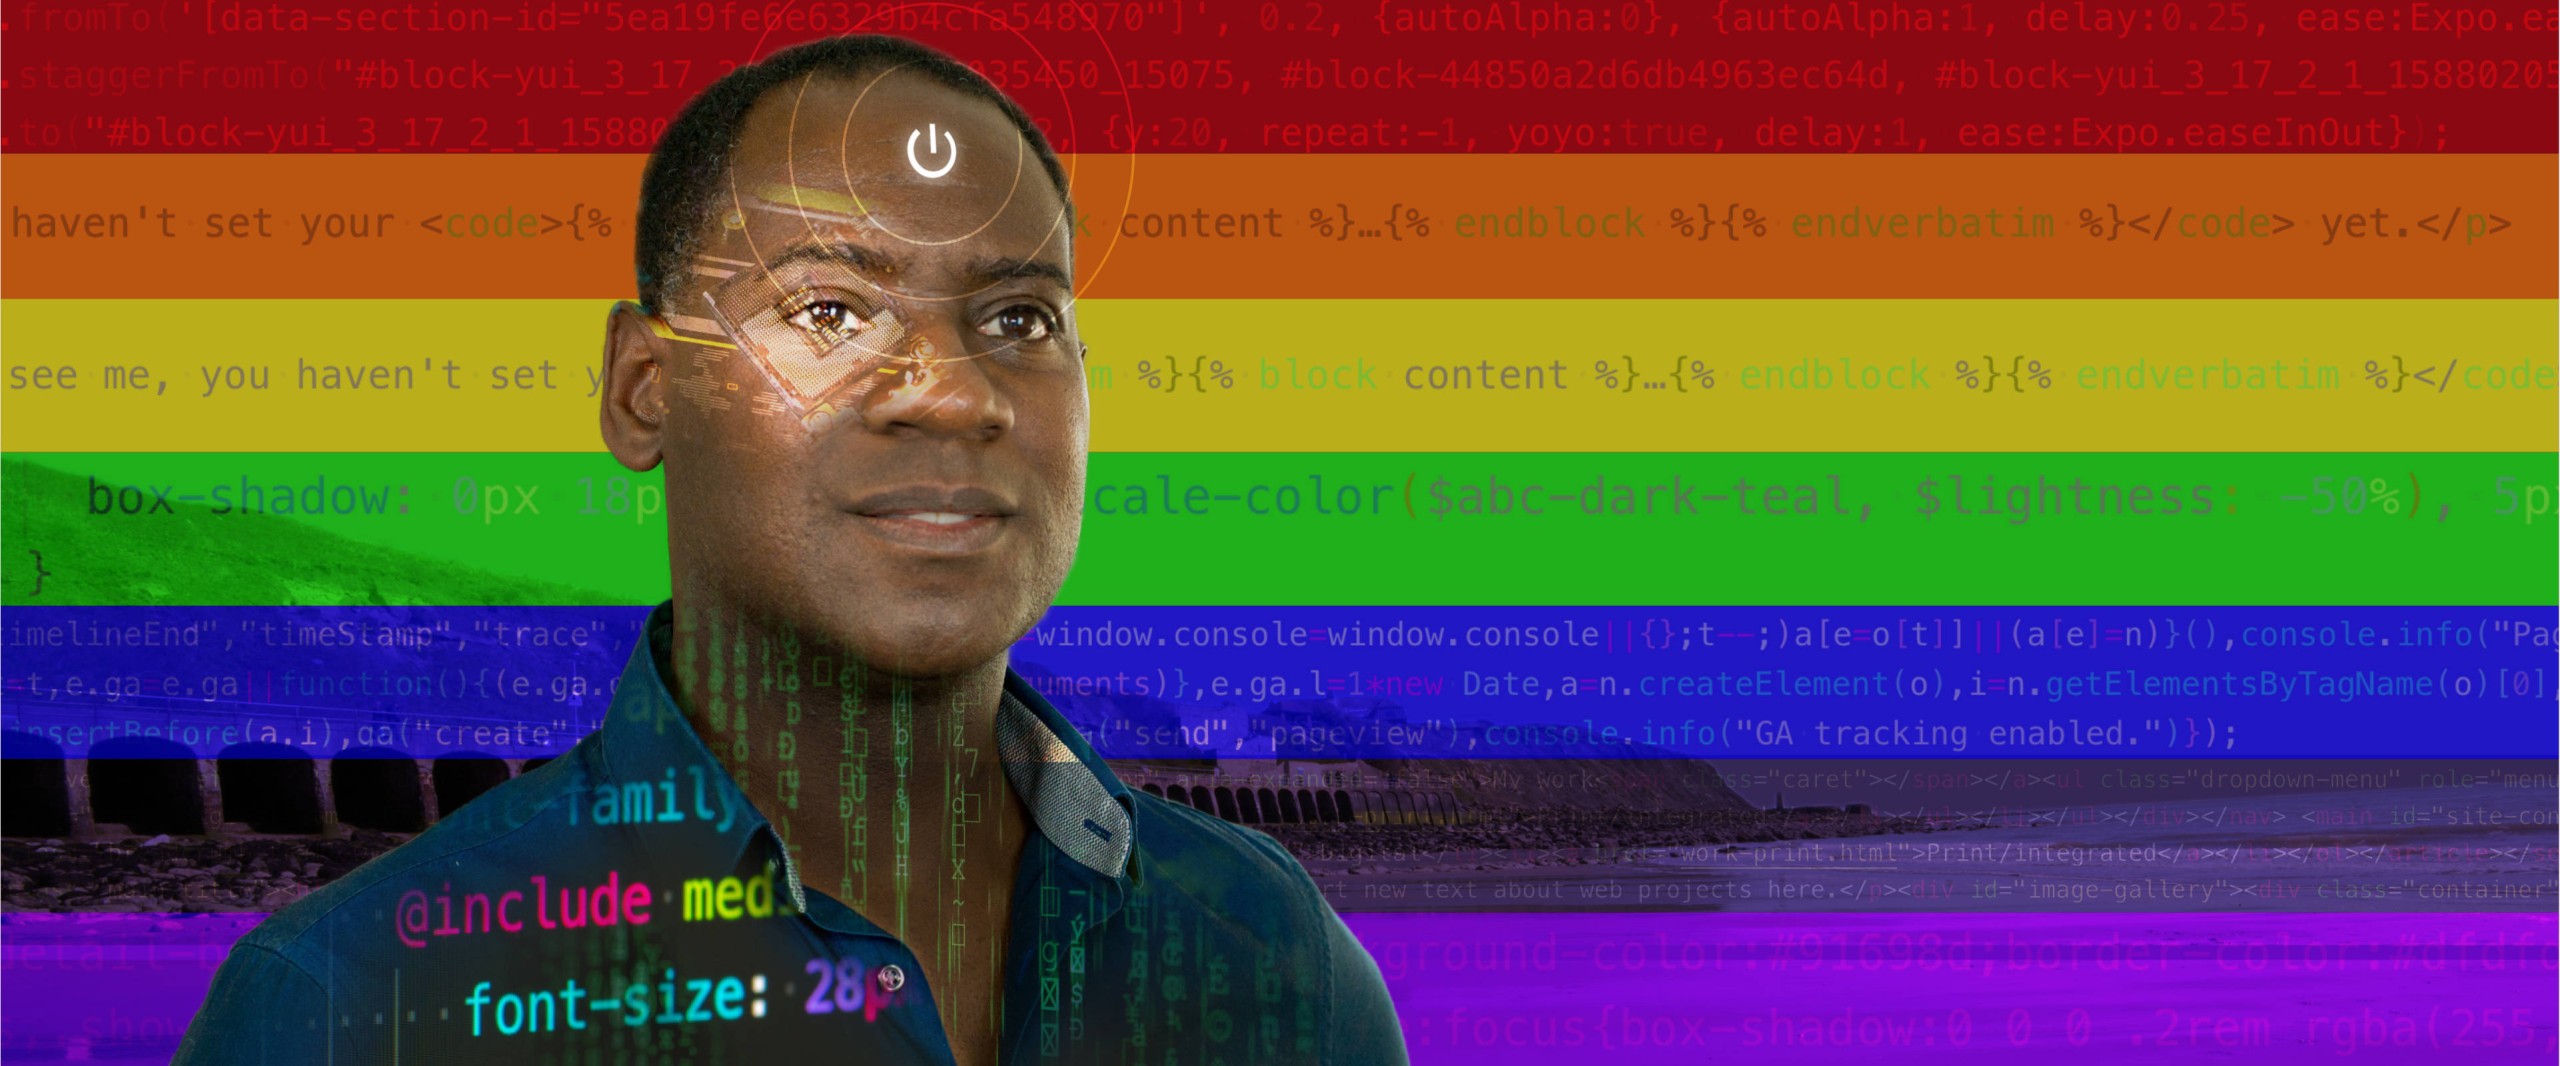 Montage image showing portrait of Anthony in front of a rainbow backdrop with html code superimposed over parts of the image